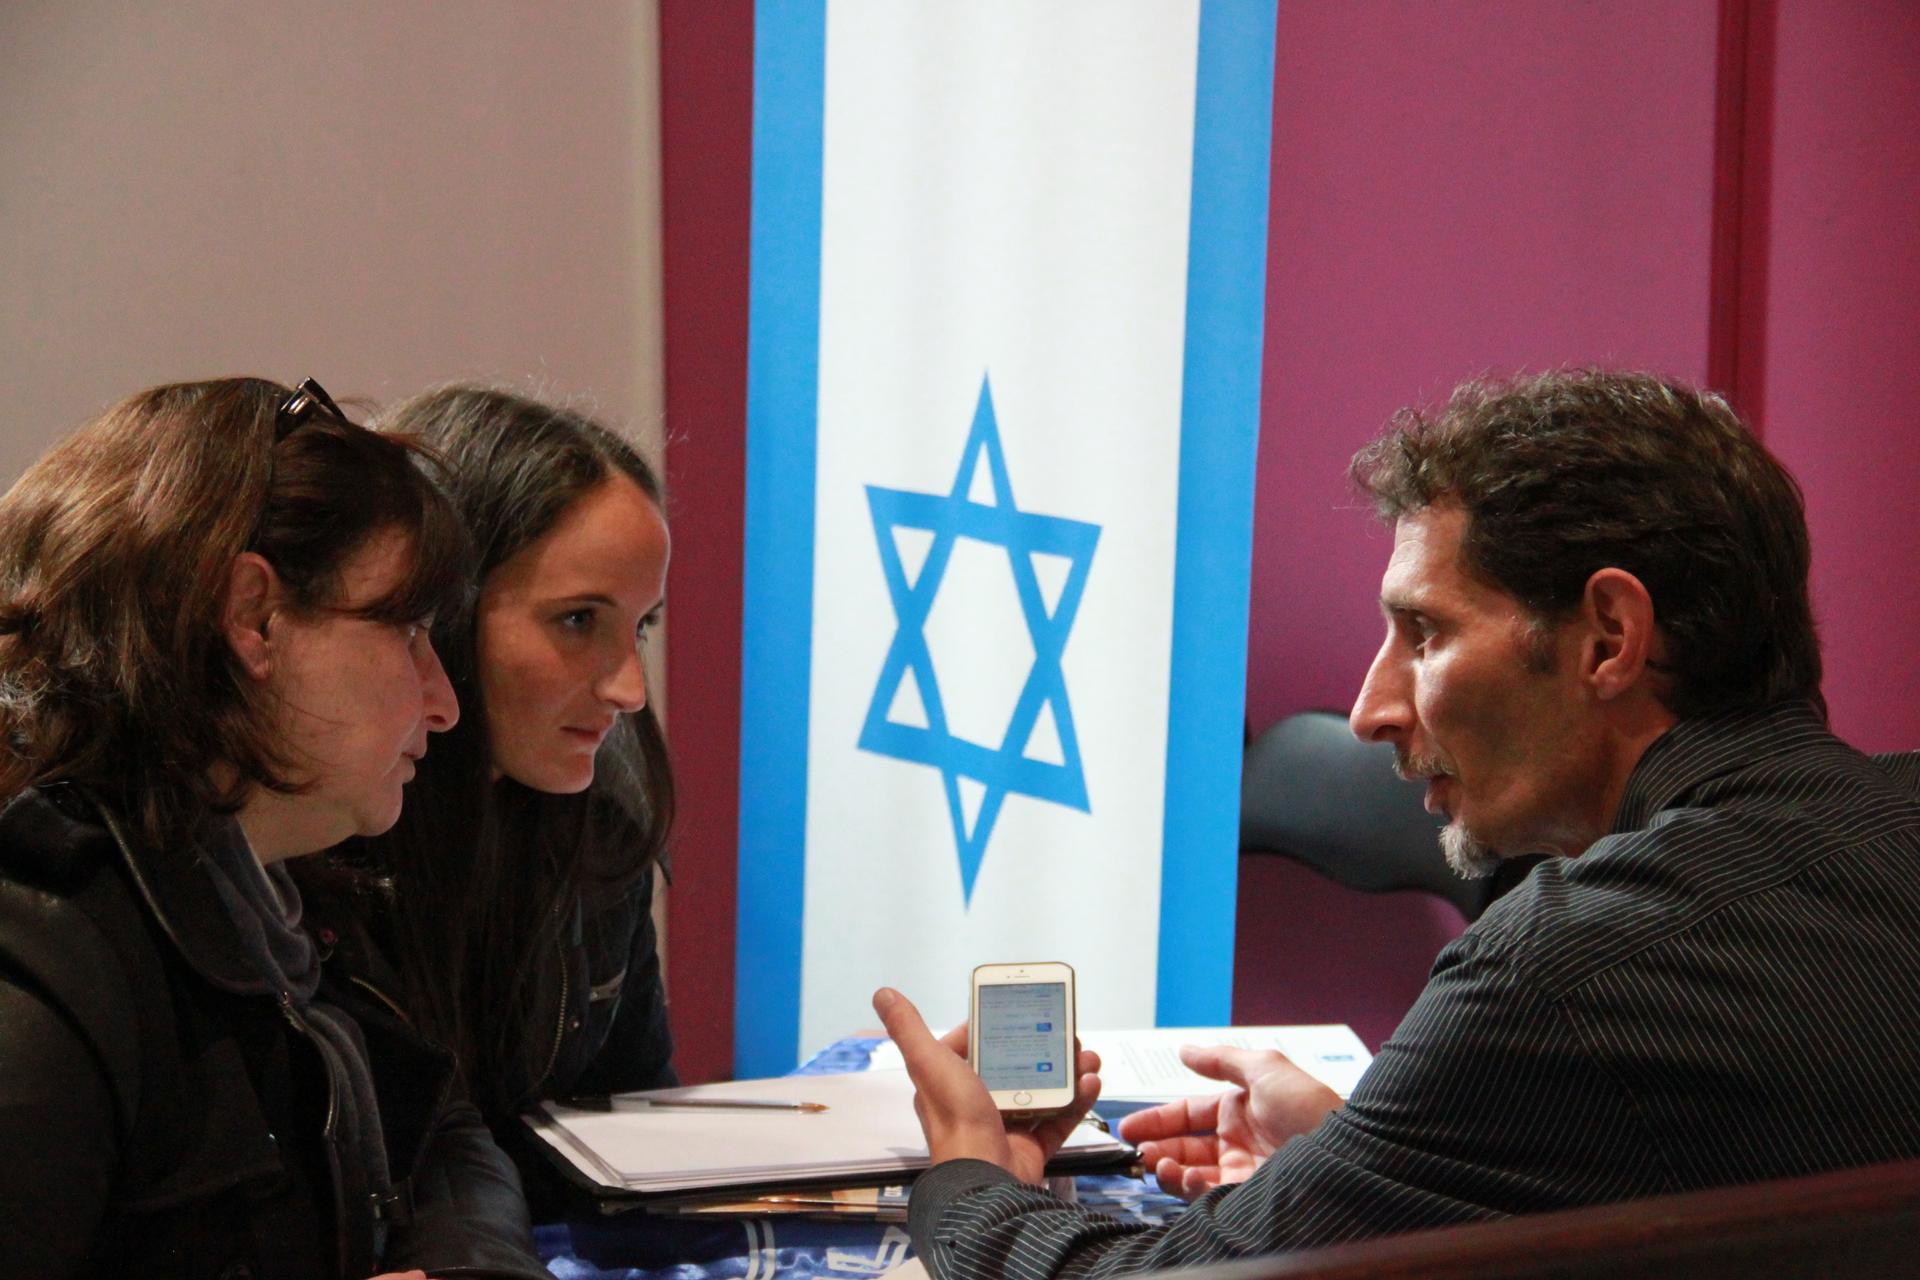 An Israeli government representative discusses Israeli immigration with prospective Jewish immigrants at an immigration expo in Paris.